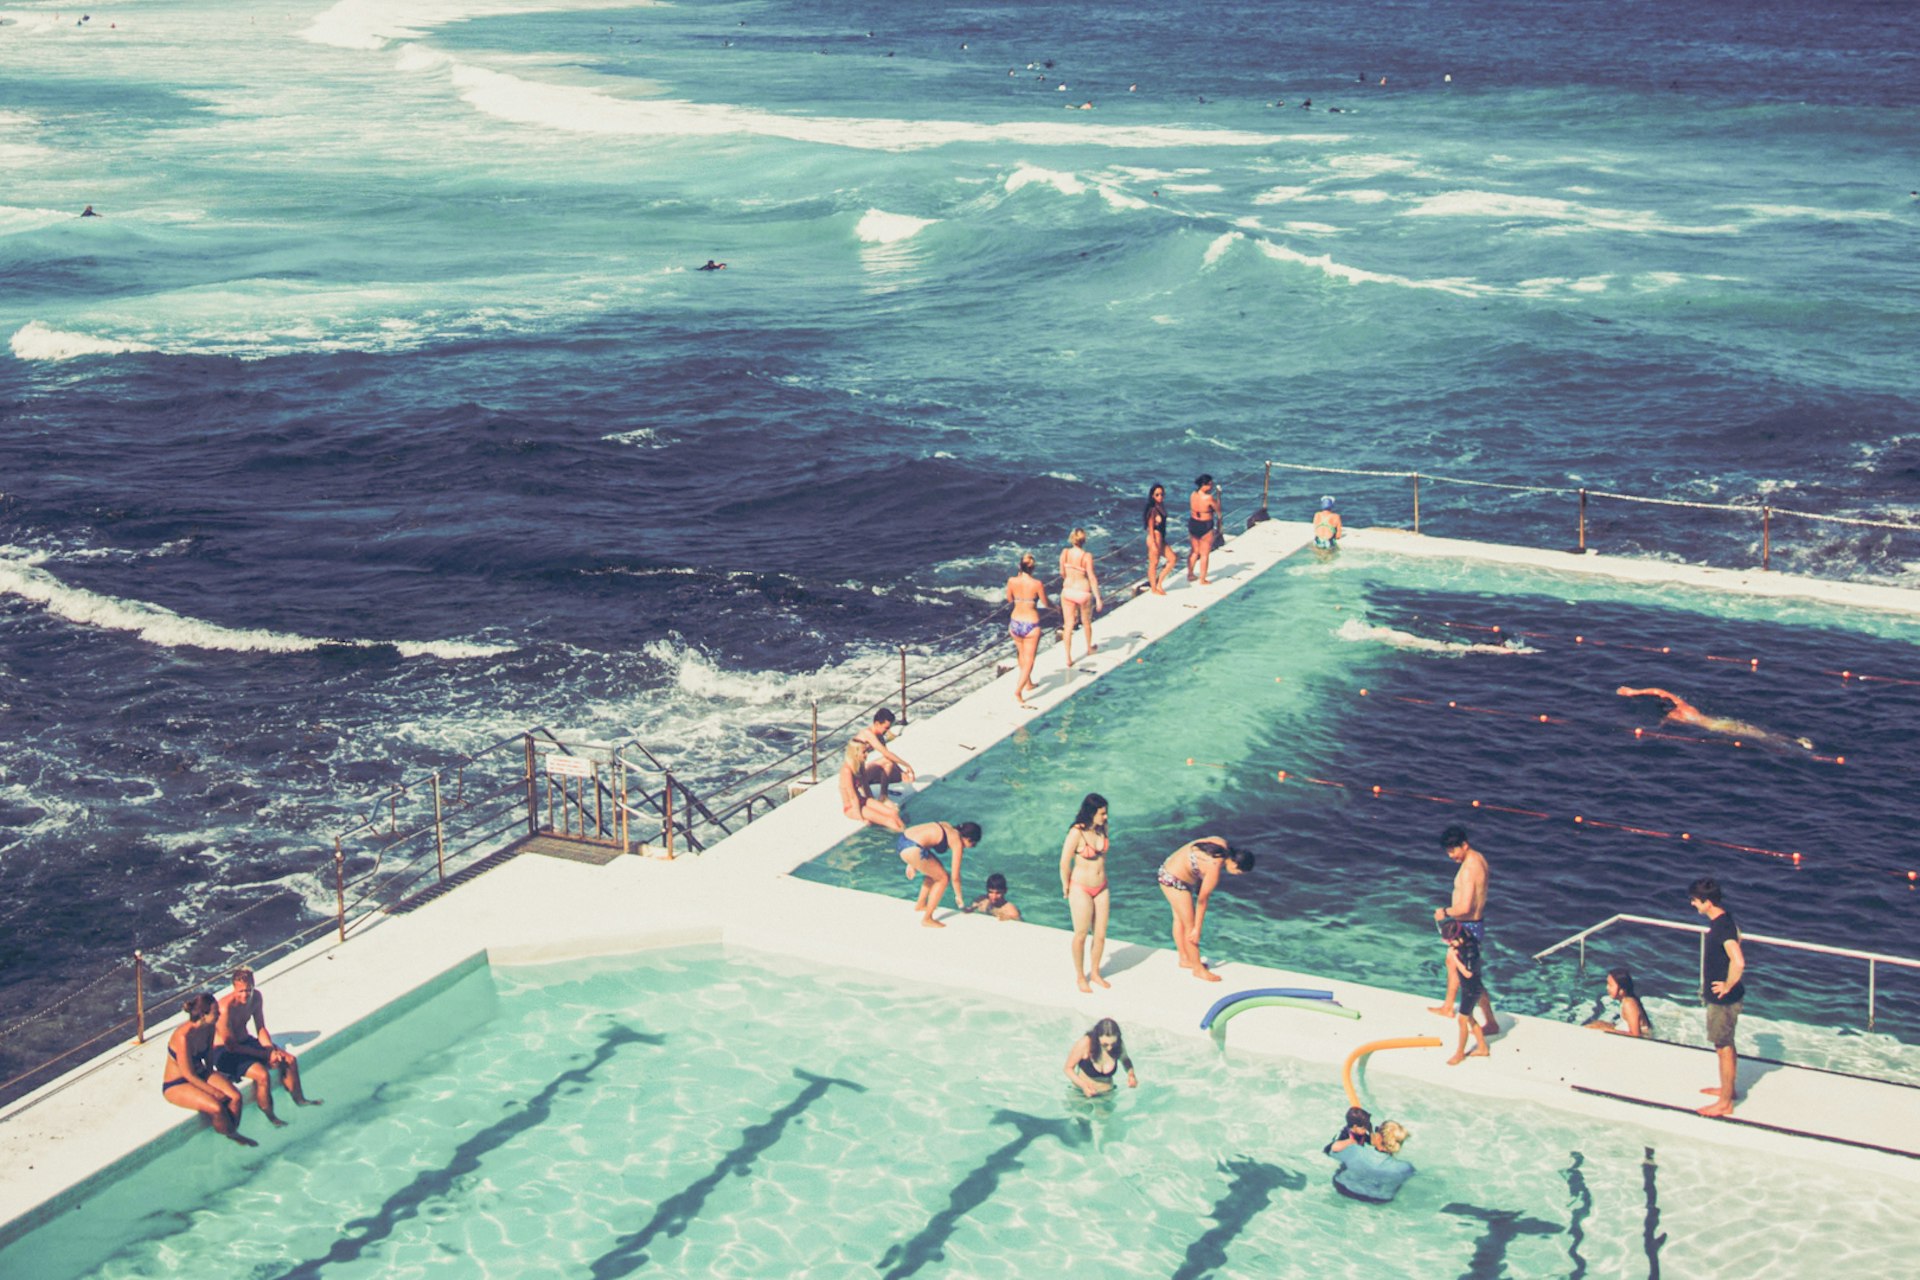 Several people are enjoying their time in a popular beachside ocean pool.